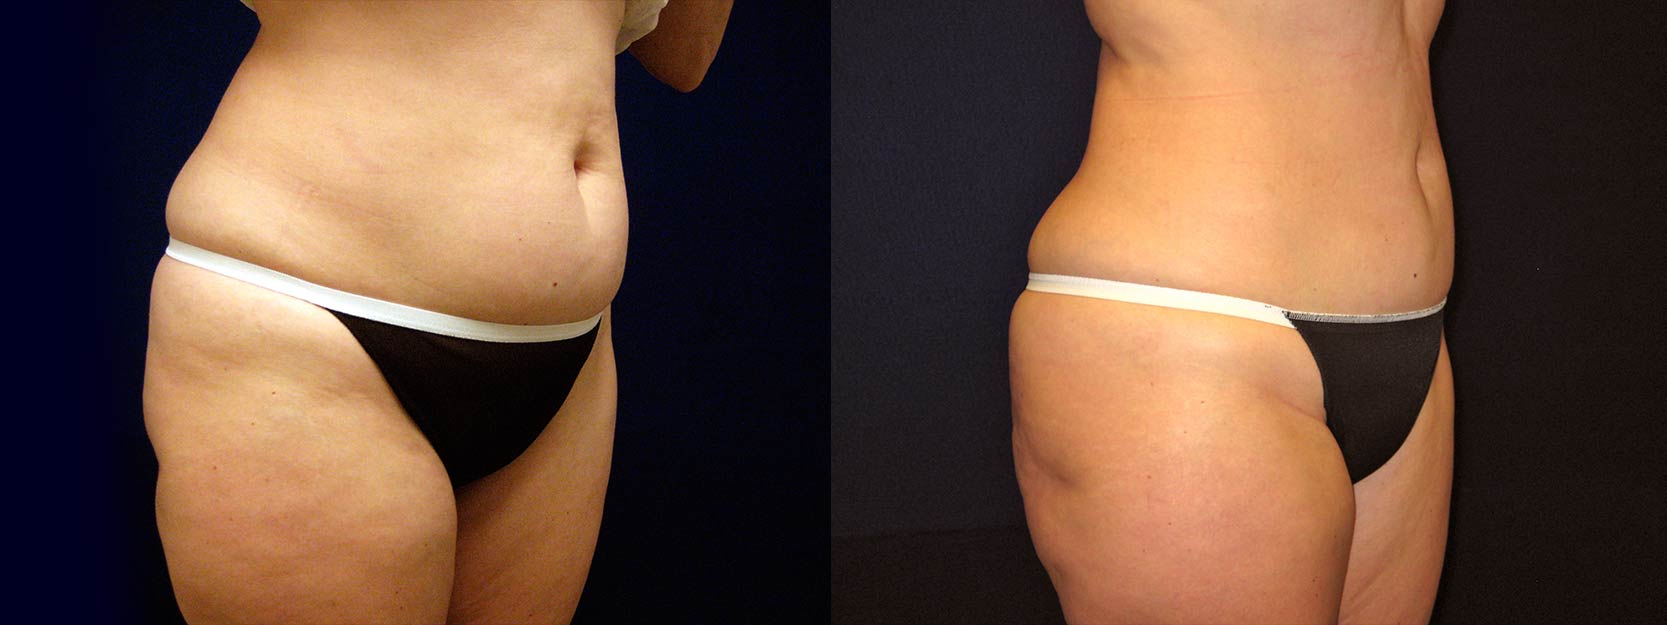 Right 3/4 View - Liposuction